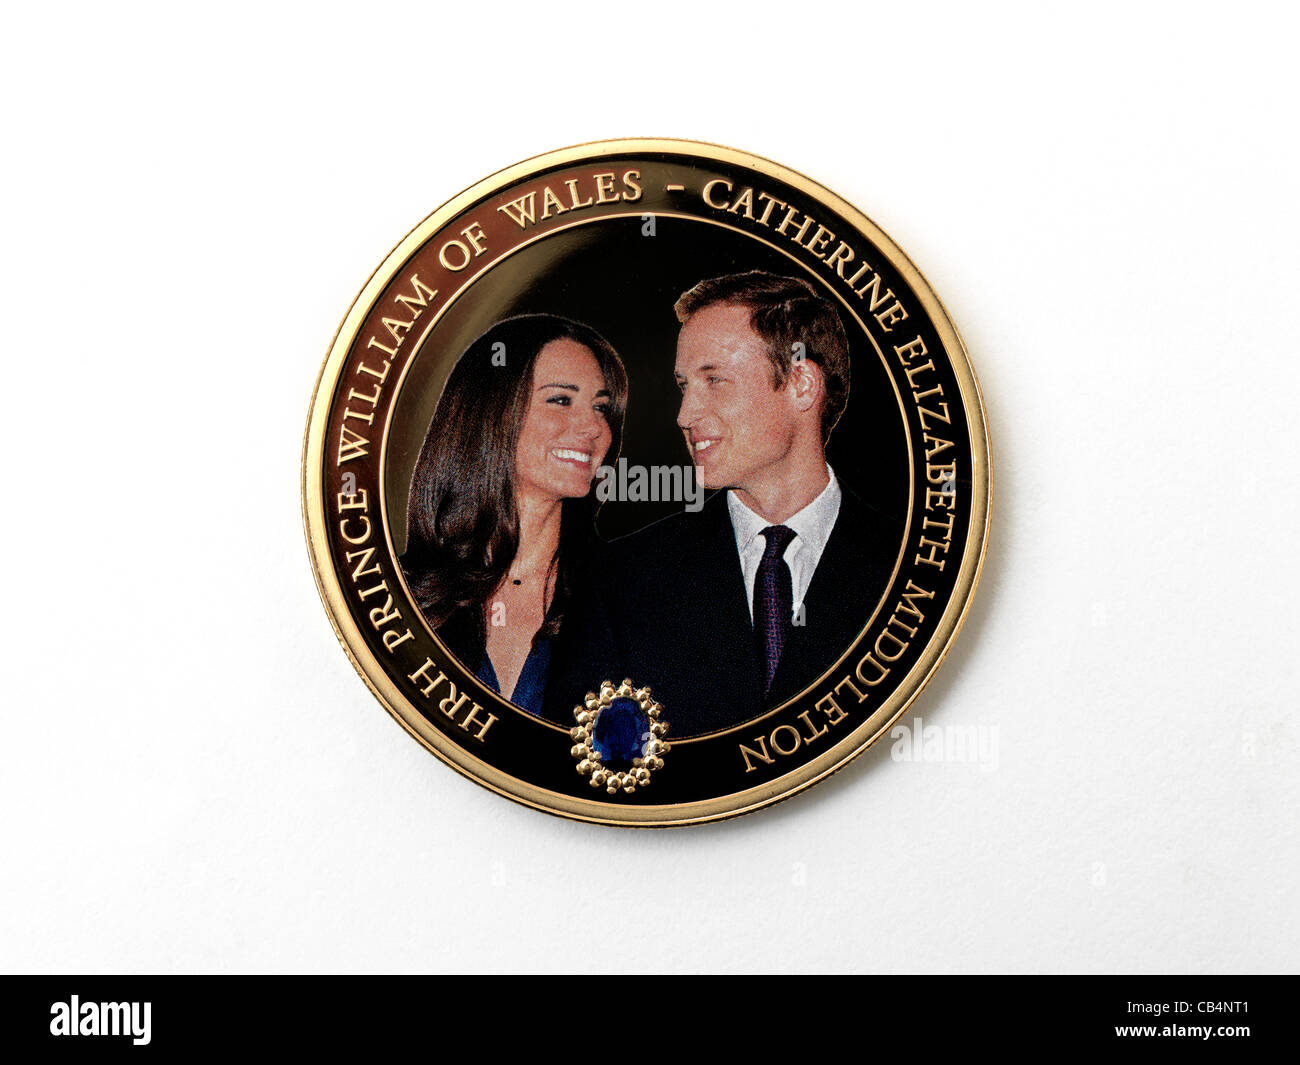 Cook Island Commemorative Gold Dollar Coin for the Royal Wedding of Prince William and Kate Middleton 2011 Stock Photo